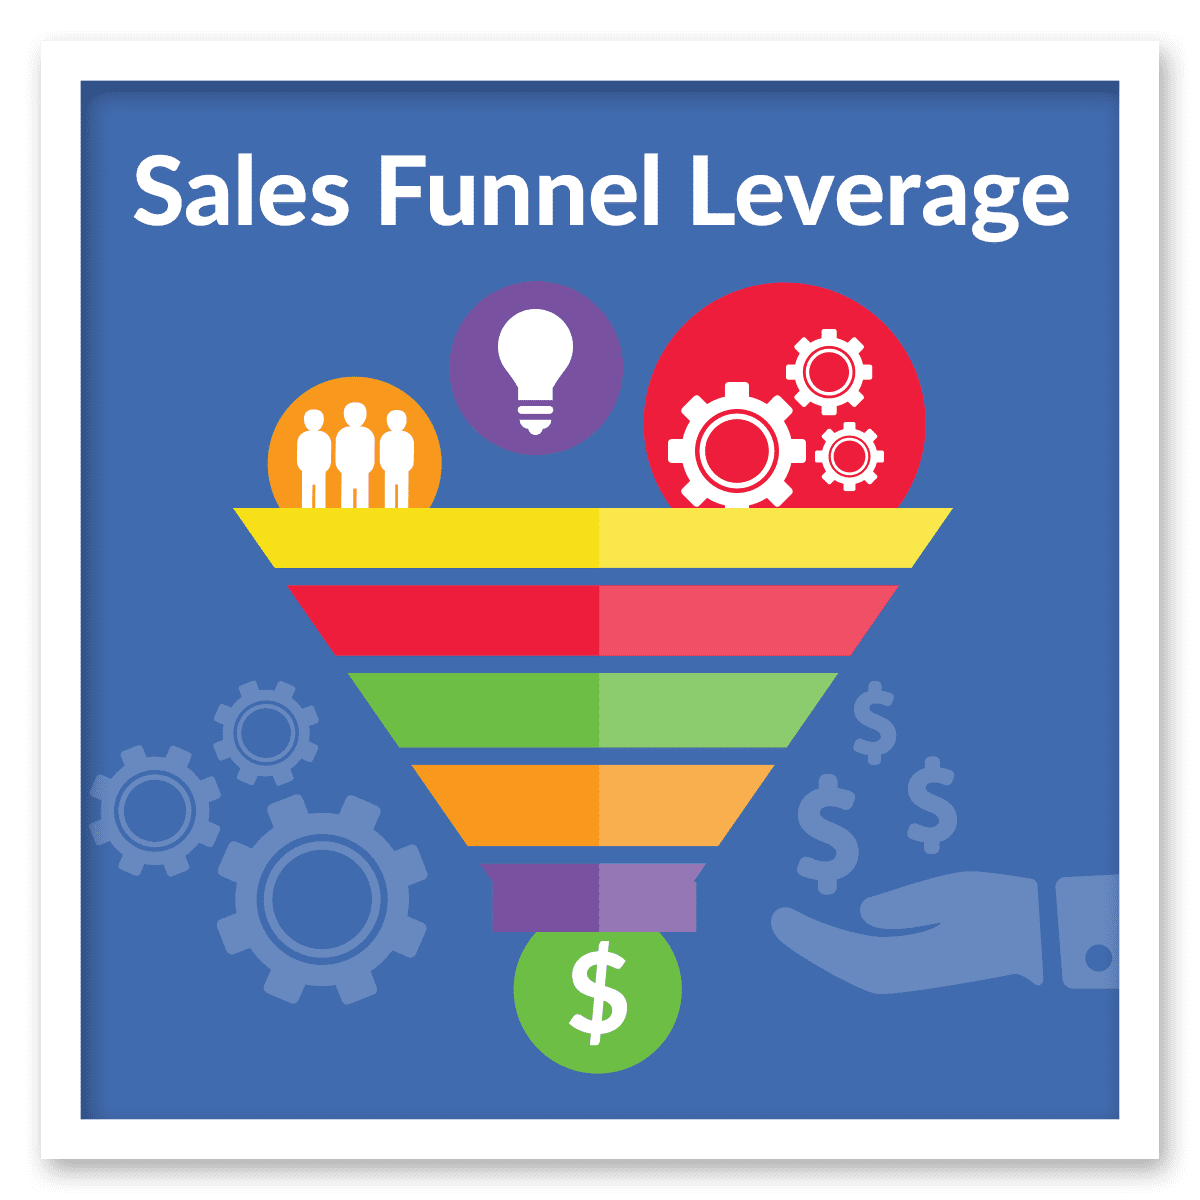 SalesFunnelLeverage_Square_withText